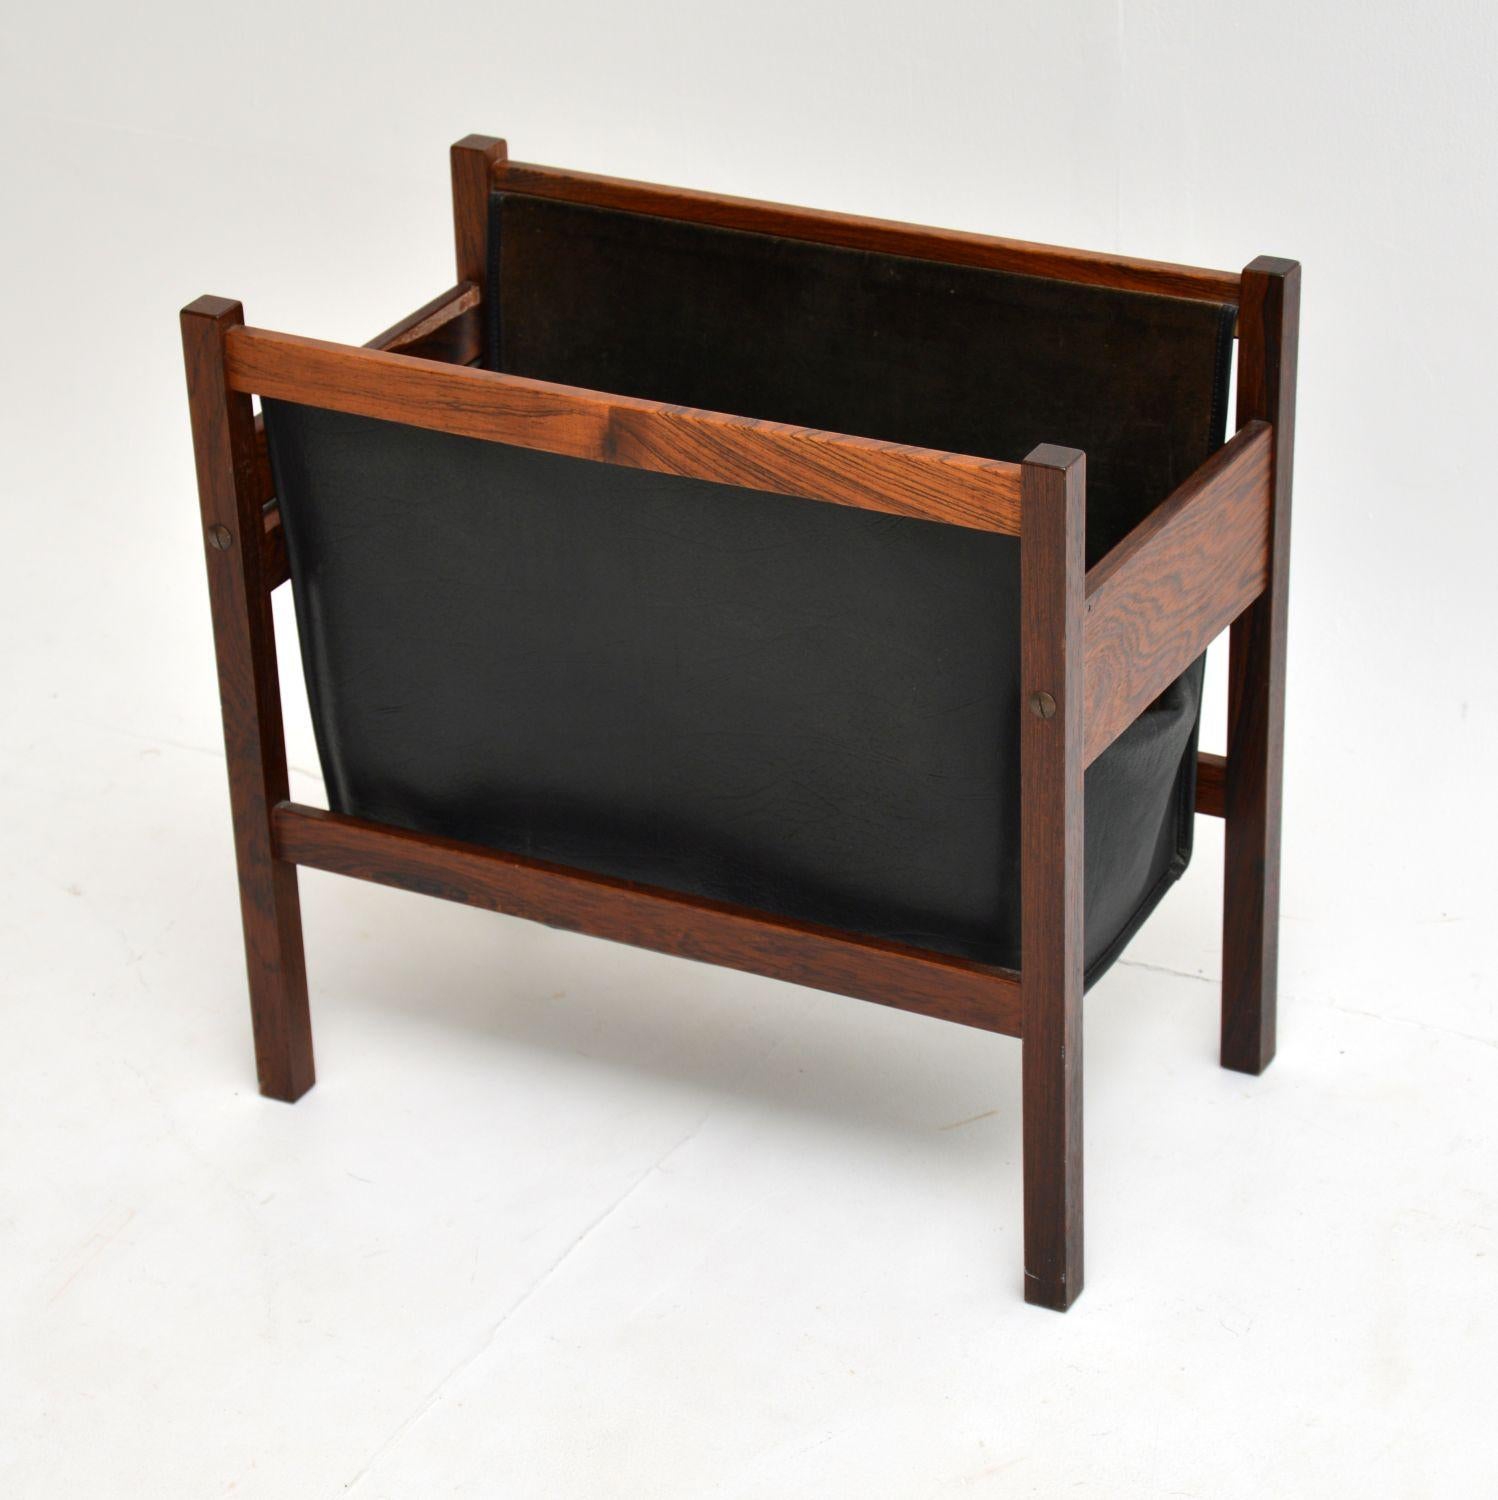 Mid-Century Modern Danish Wood and Leather Magazine or Paper Holder